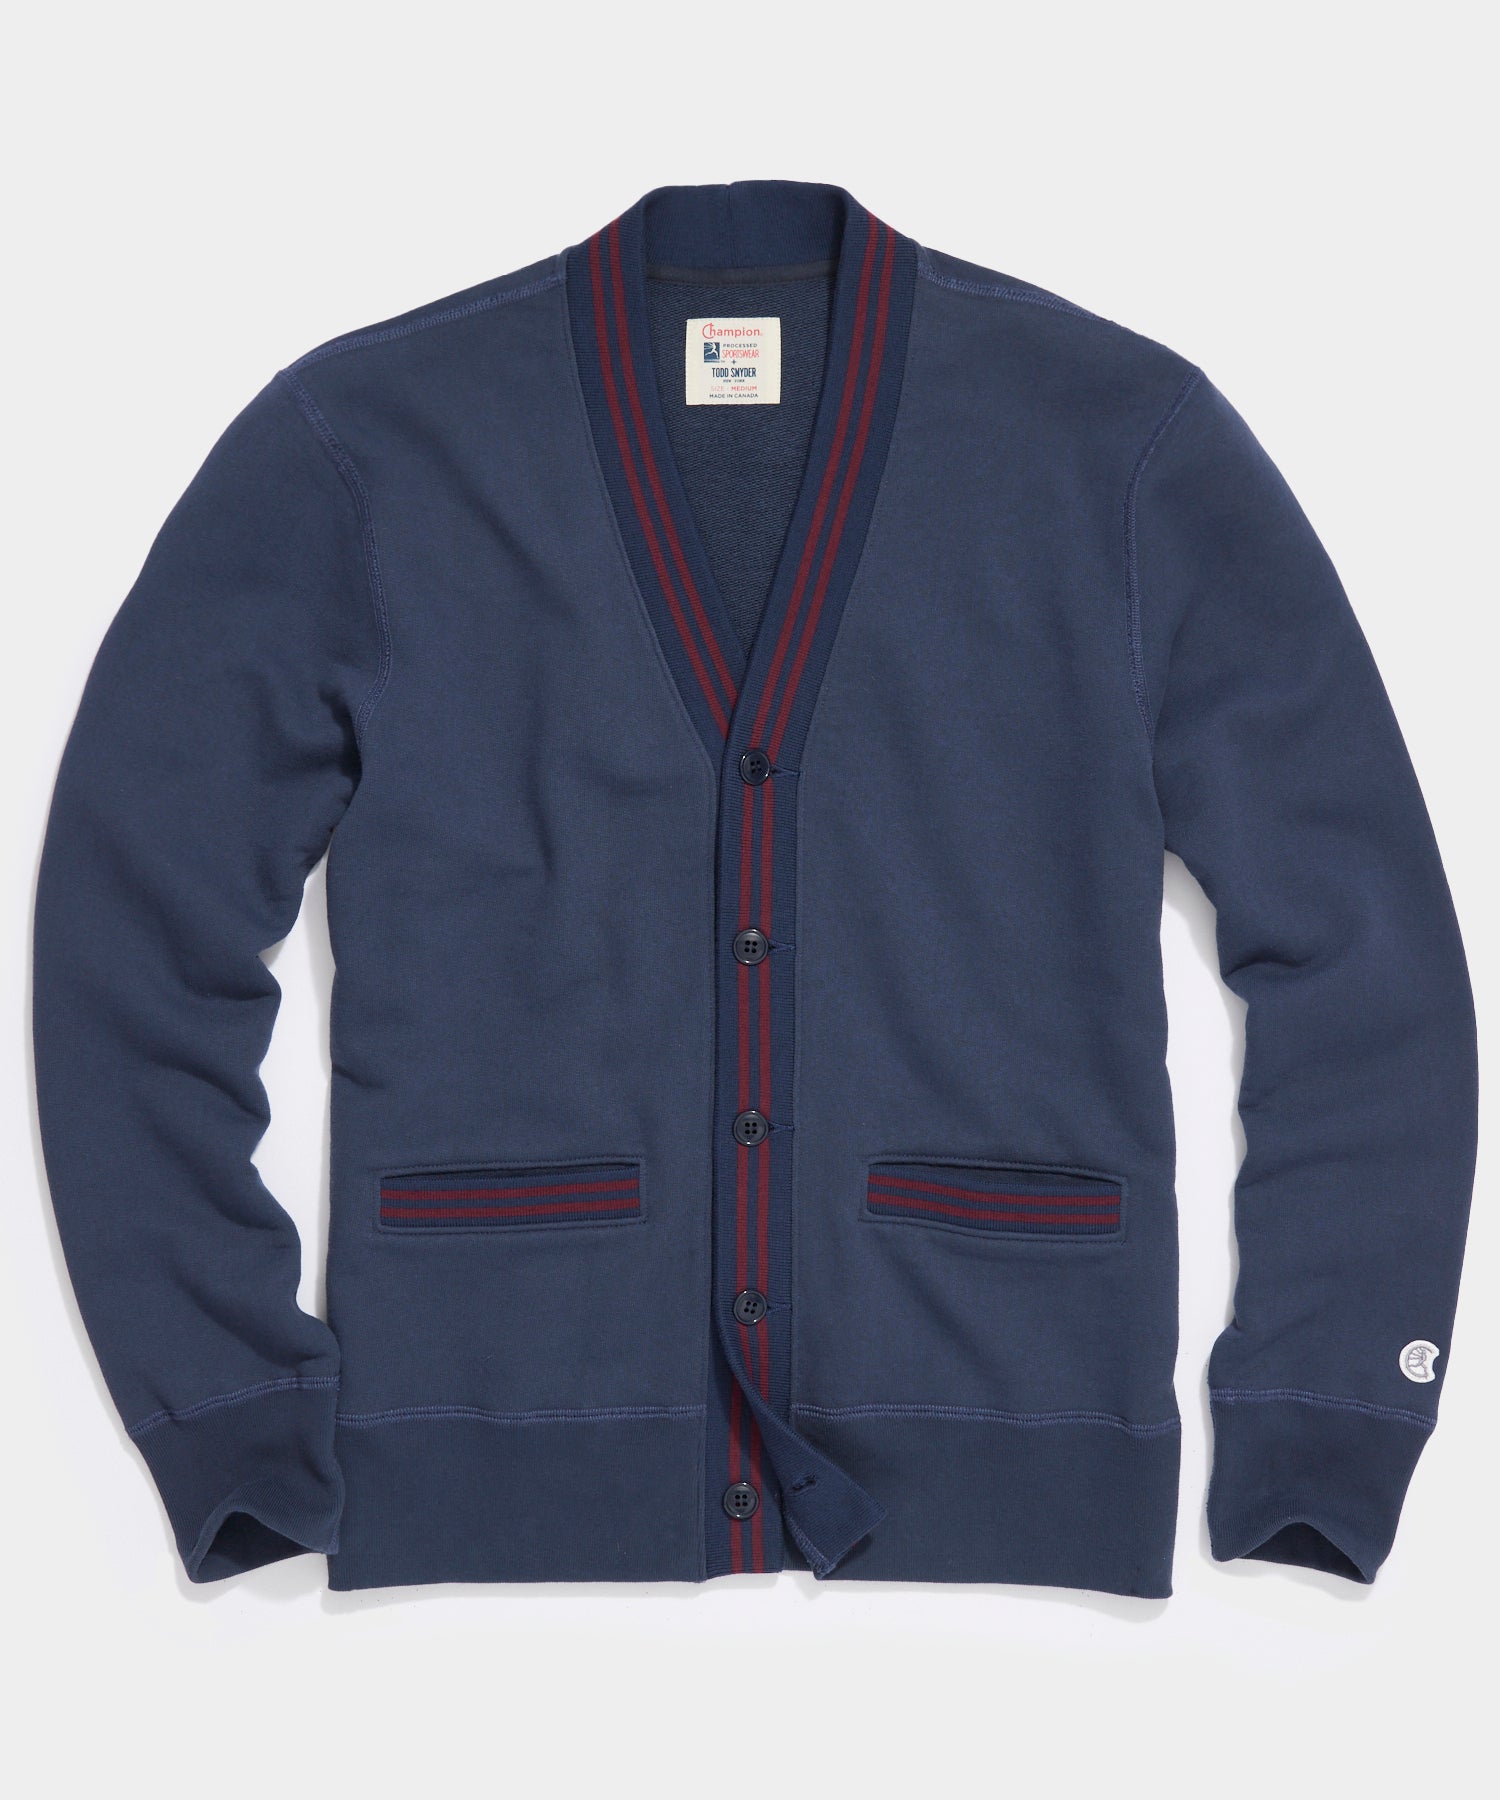 1940s Men’s Clothing & Fashion History Tipped Cardigan in Nautical Navy $268.00 AT vintagedancer.com